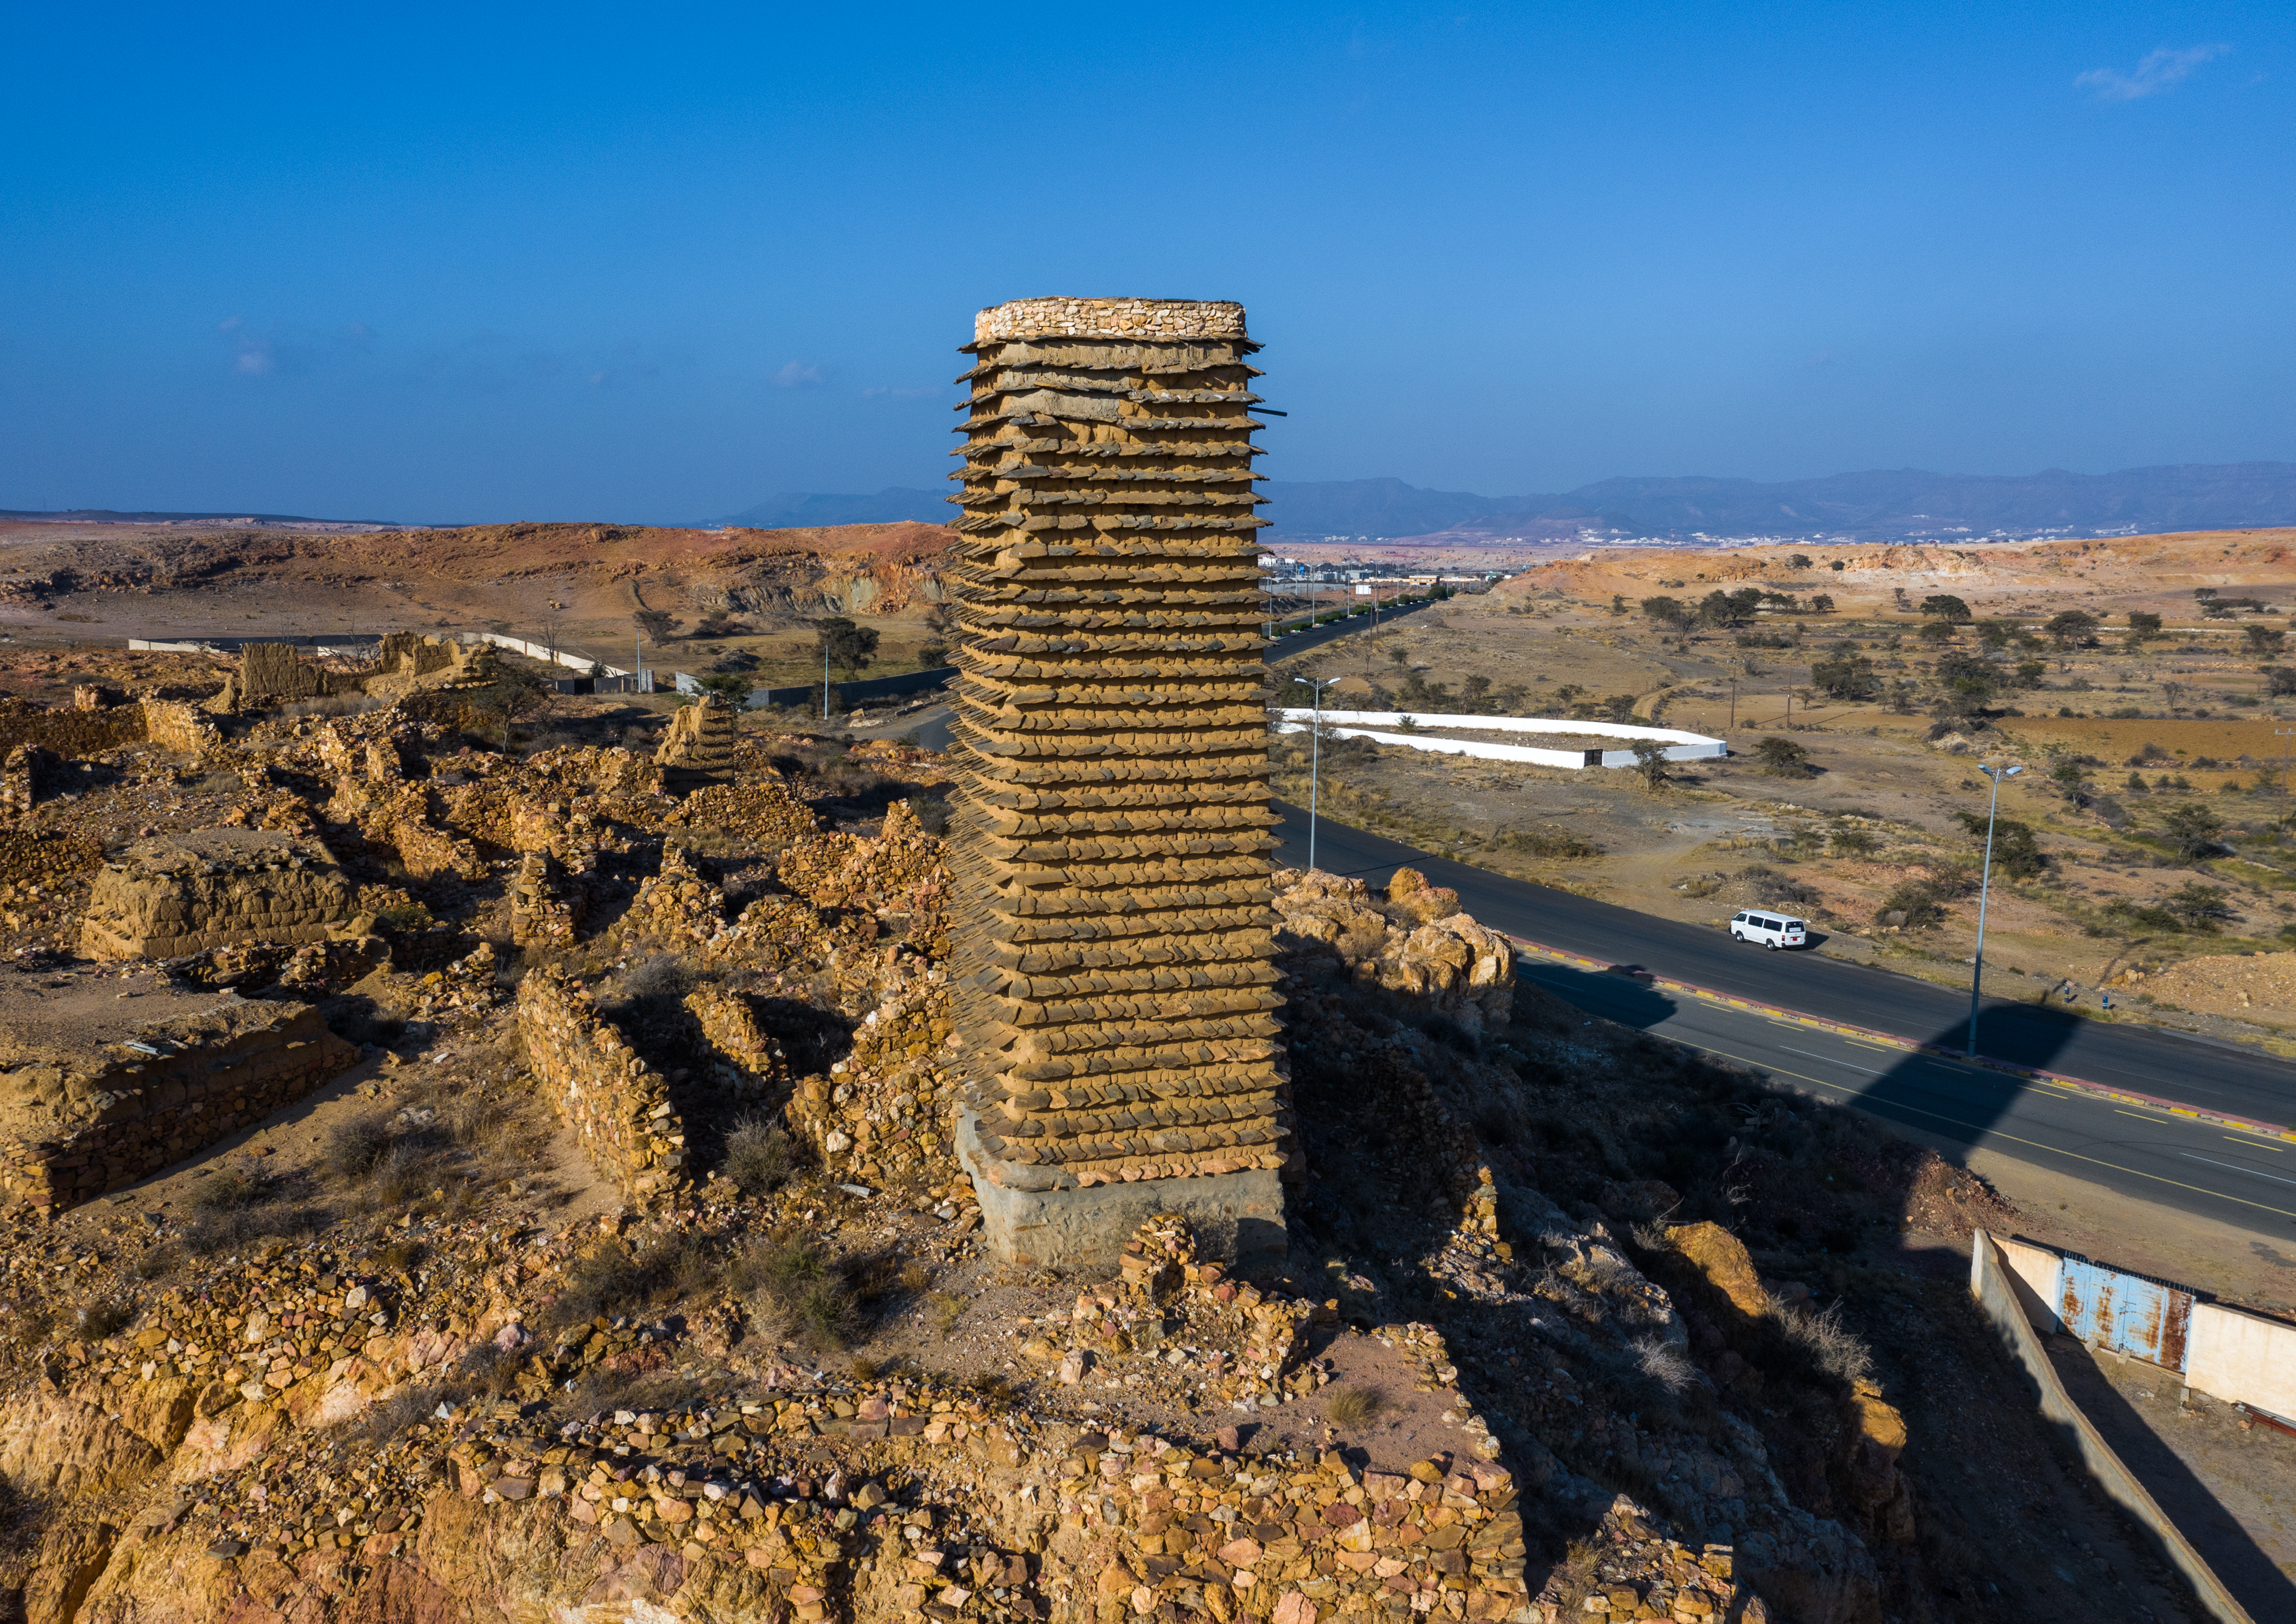 A stone and mud watchtower in Asir province, Saudi Arabia (photo: Eric Lafforgue)